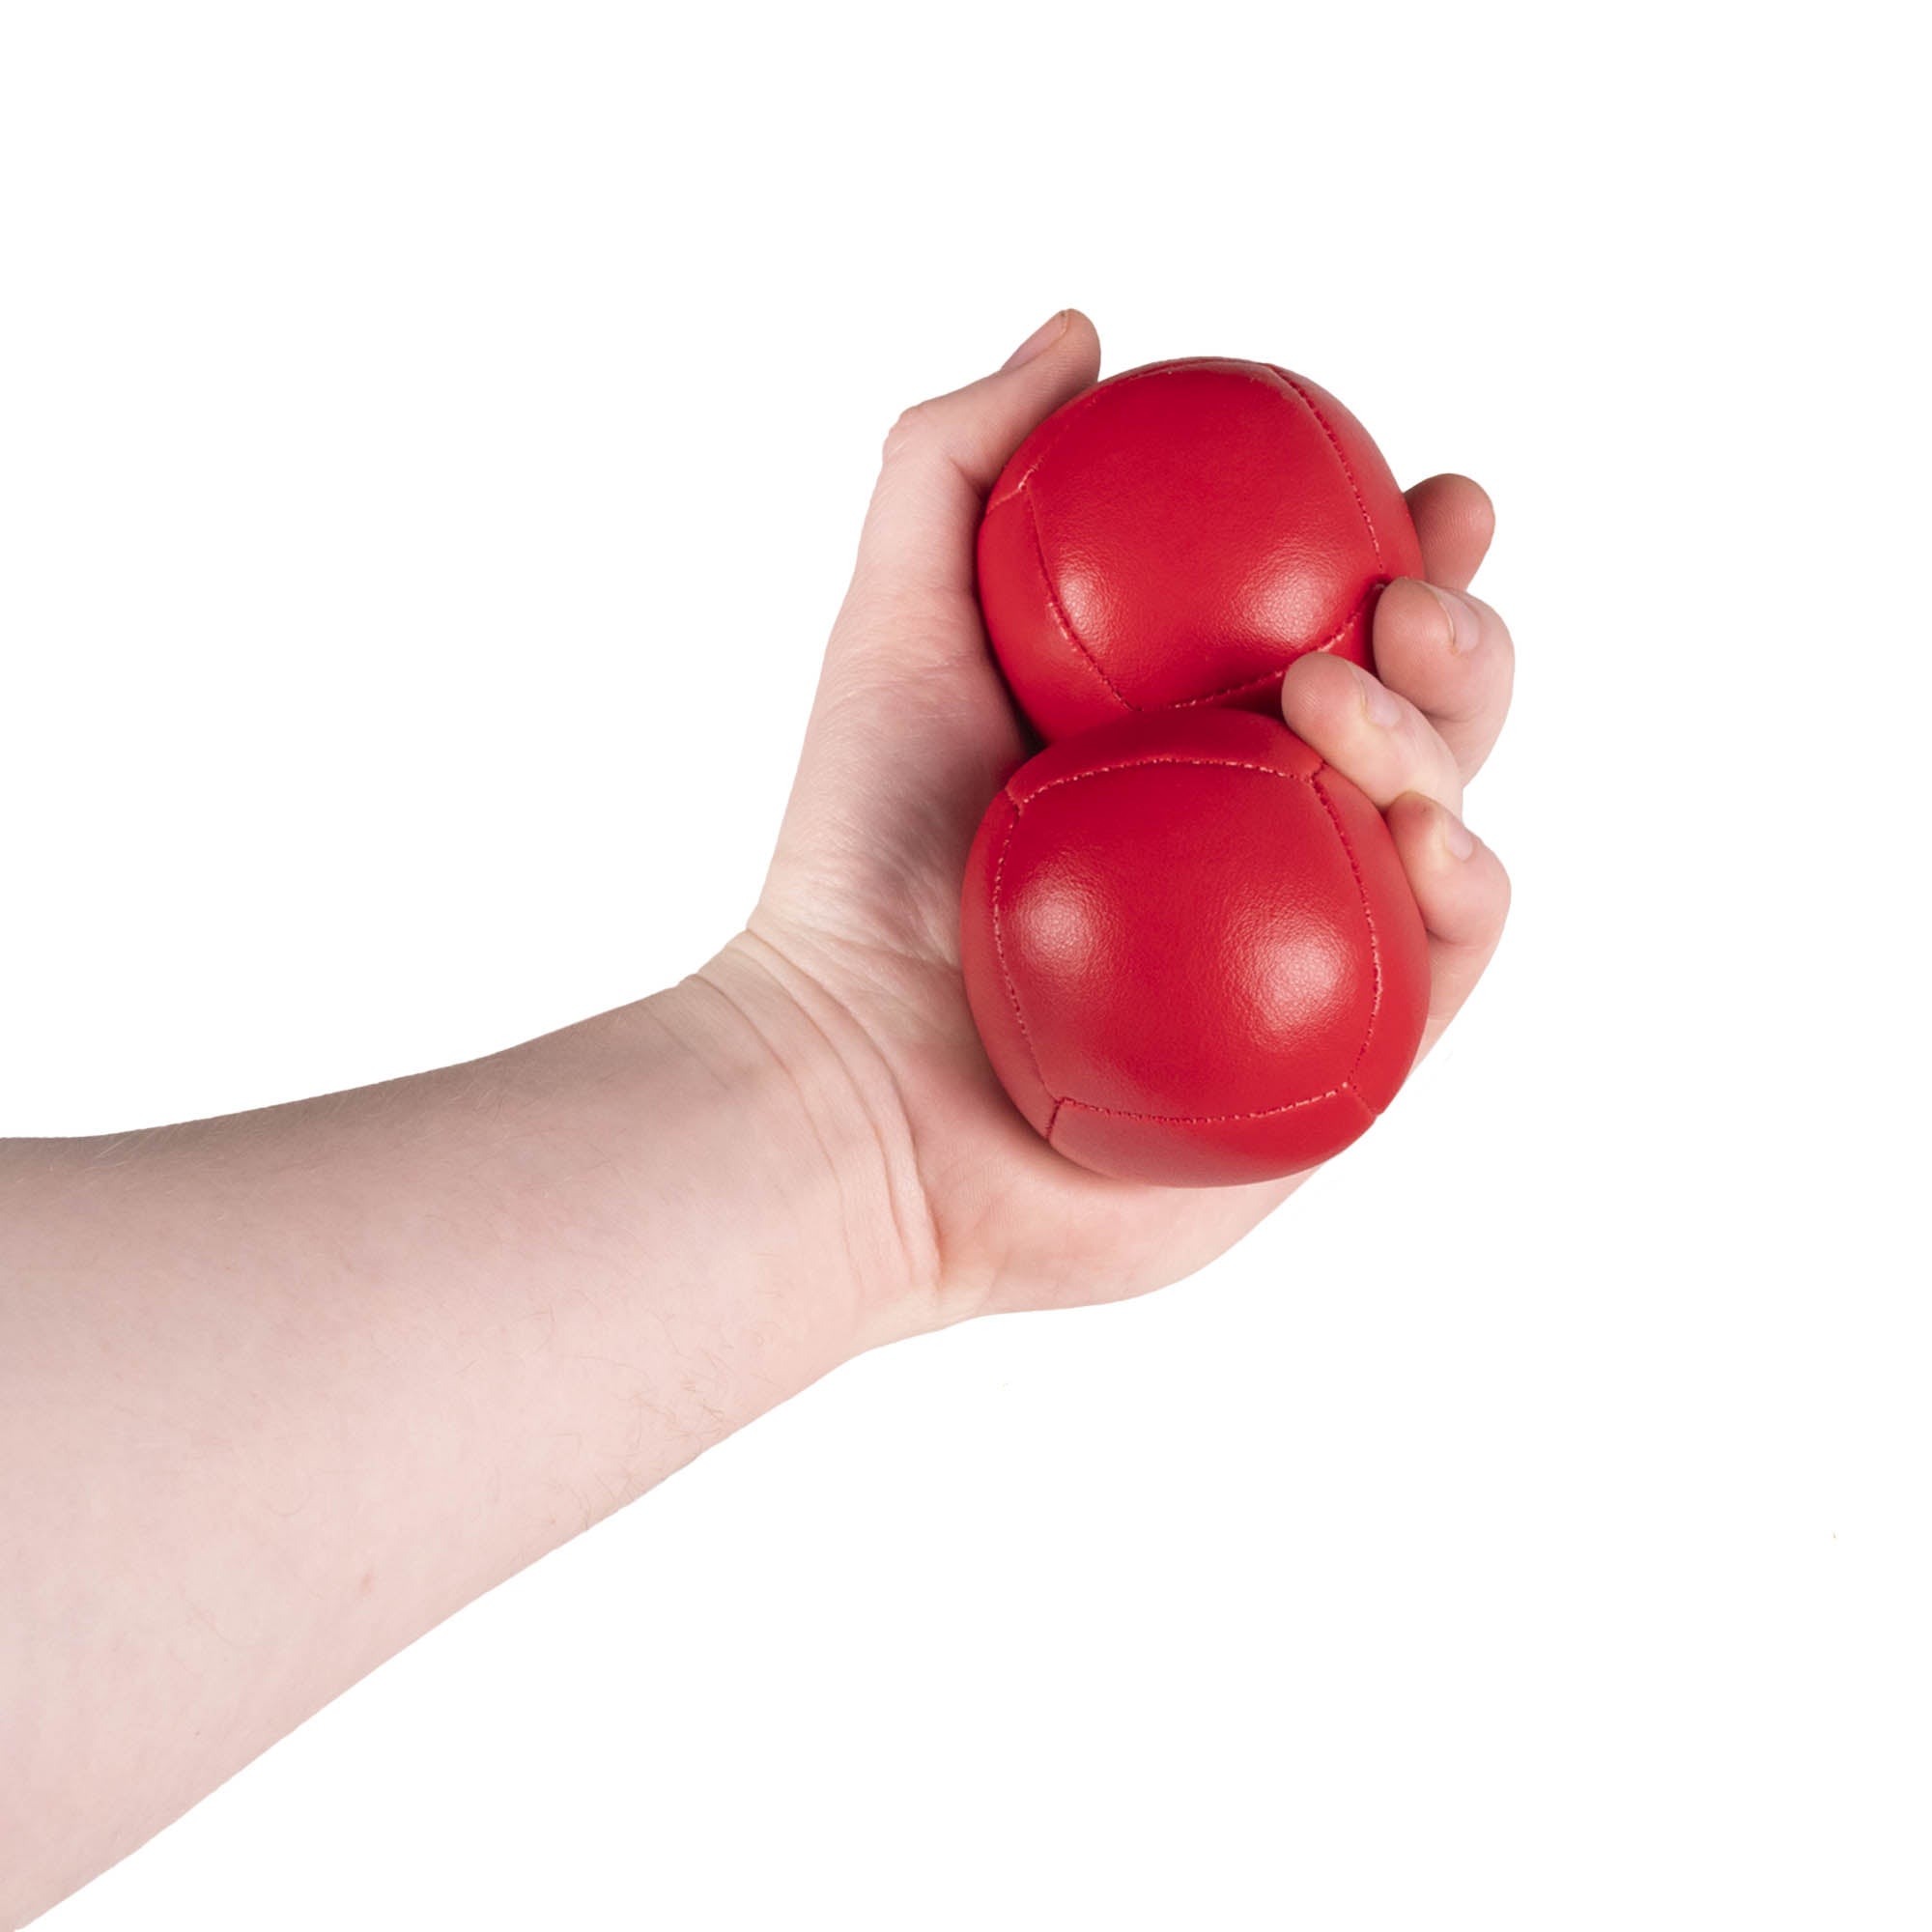 Firetoys two red 110g thud juggling balls in hand